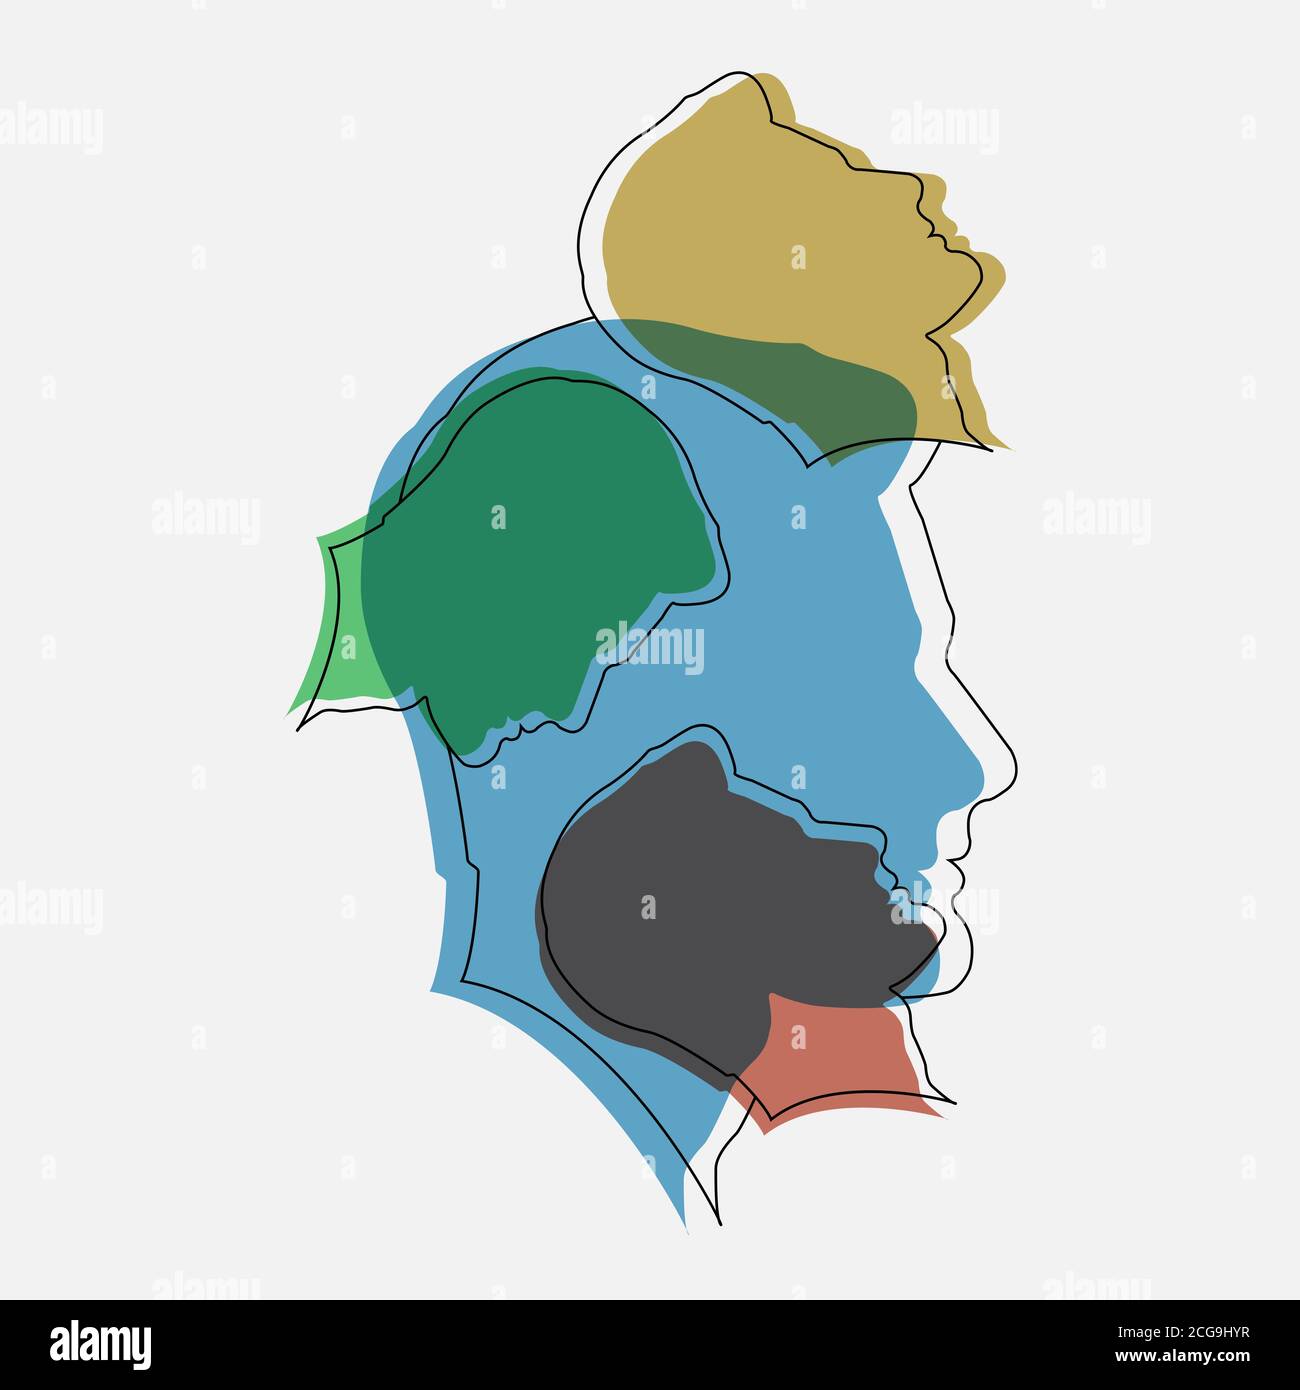 concept of personality diversity. two contours and silhouettes of a male and female face. Stock illustration Stock Vector